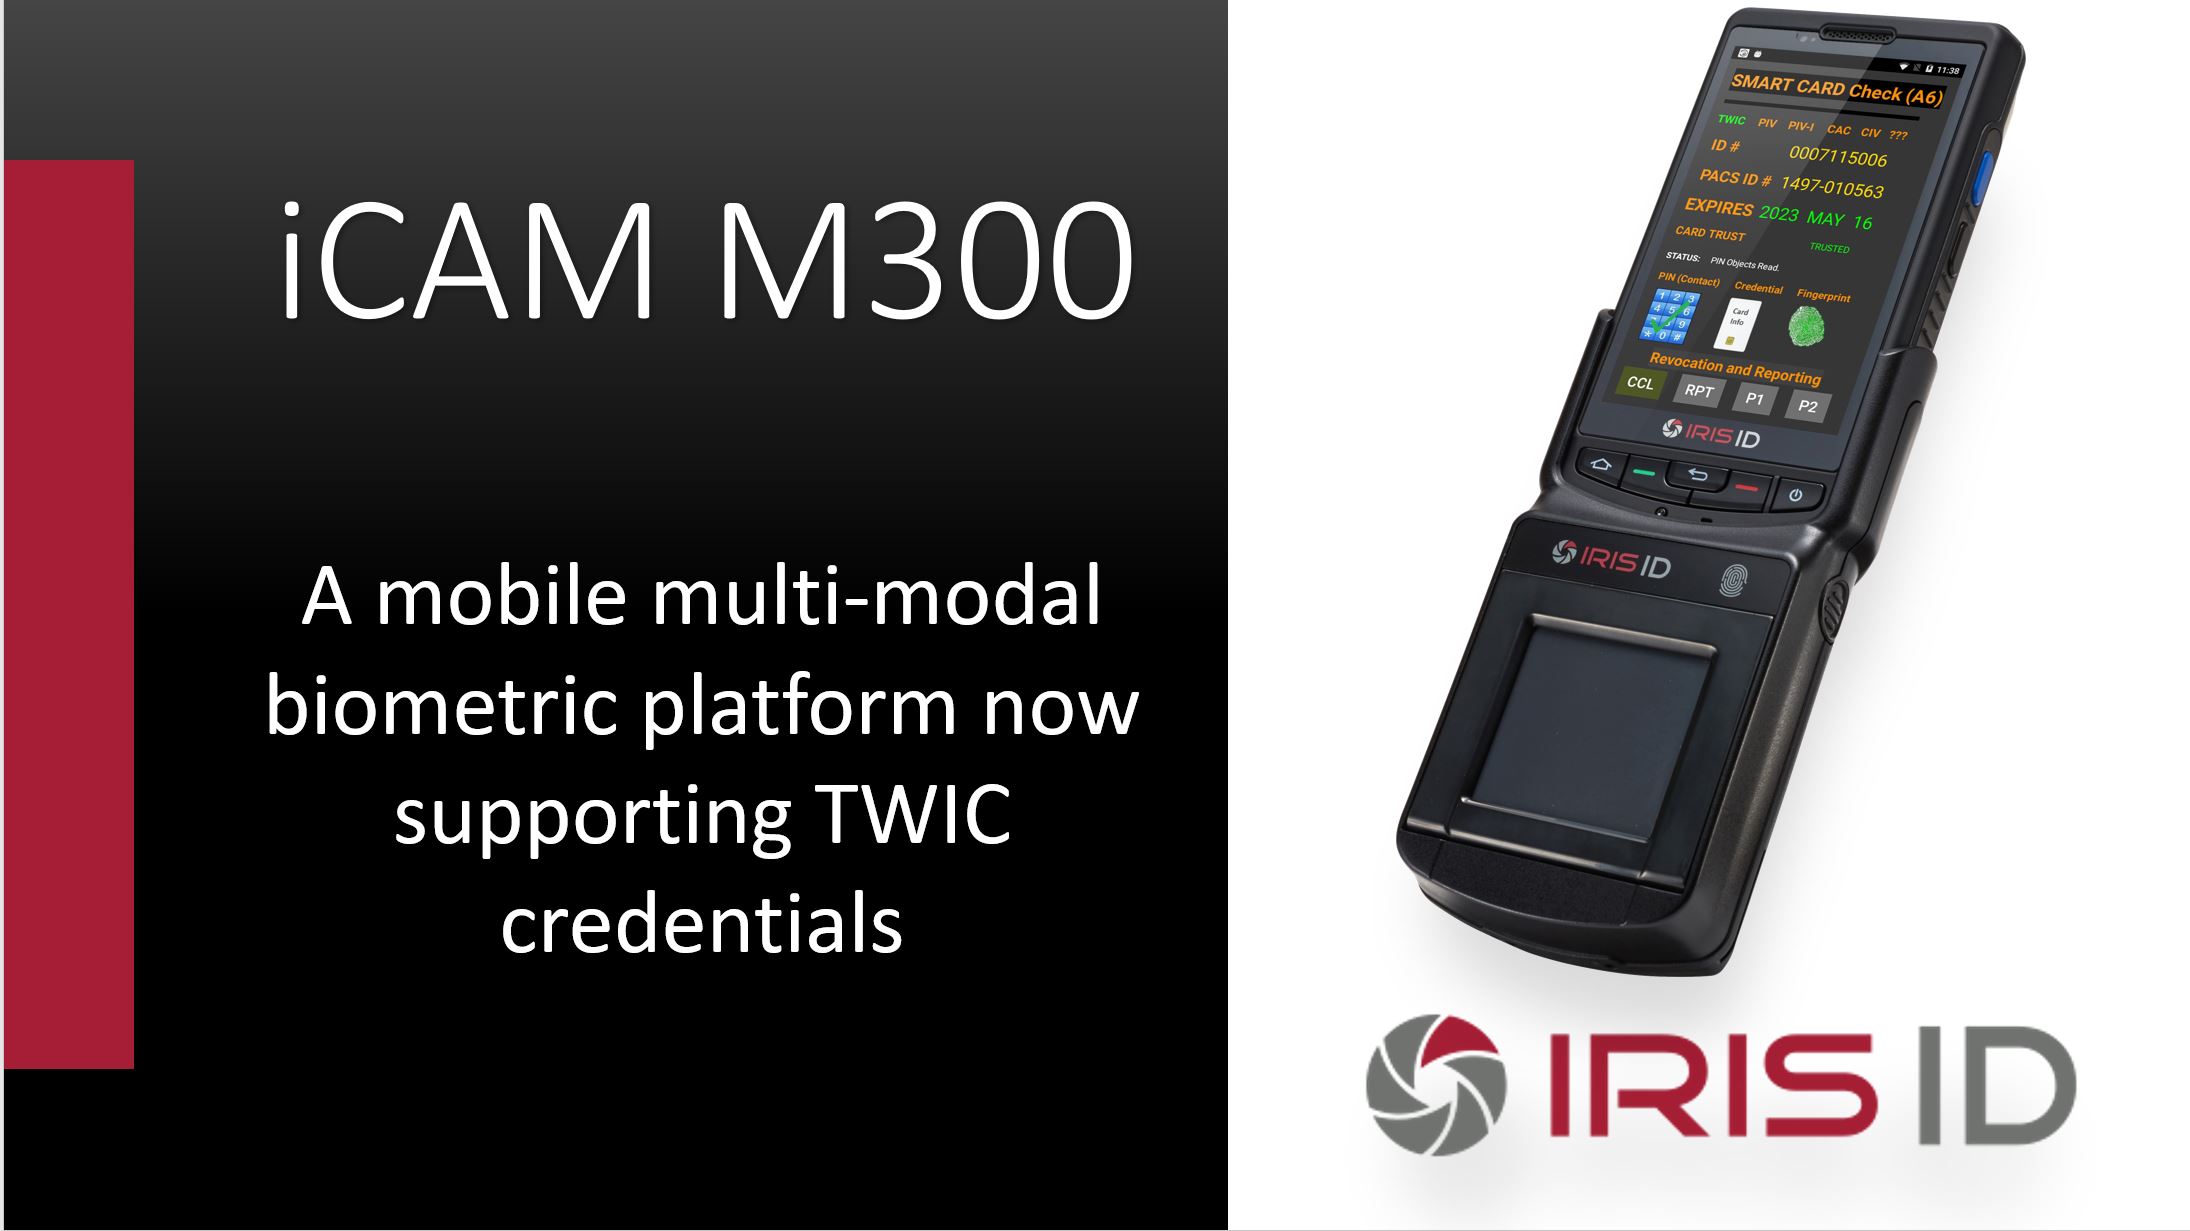 photo for iCAM M300 press release